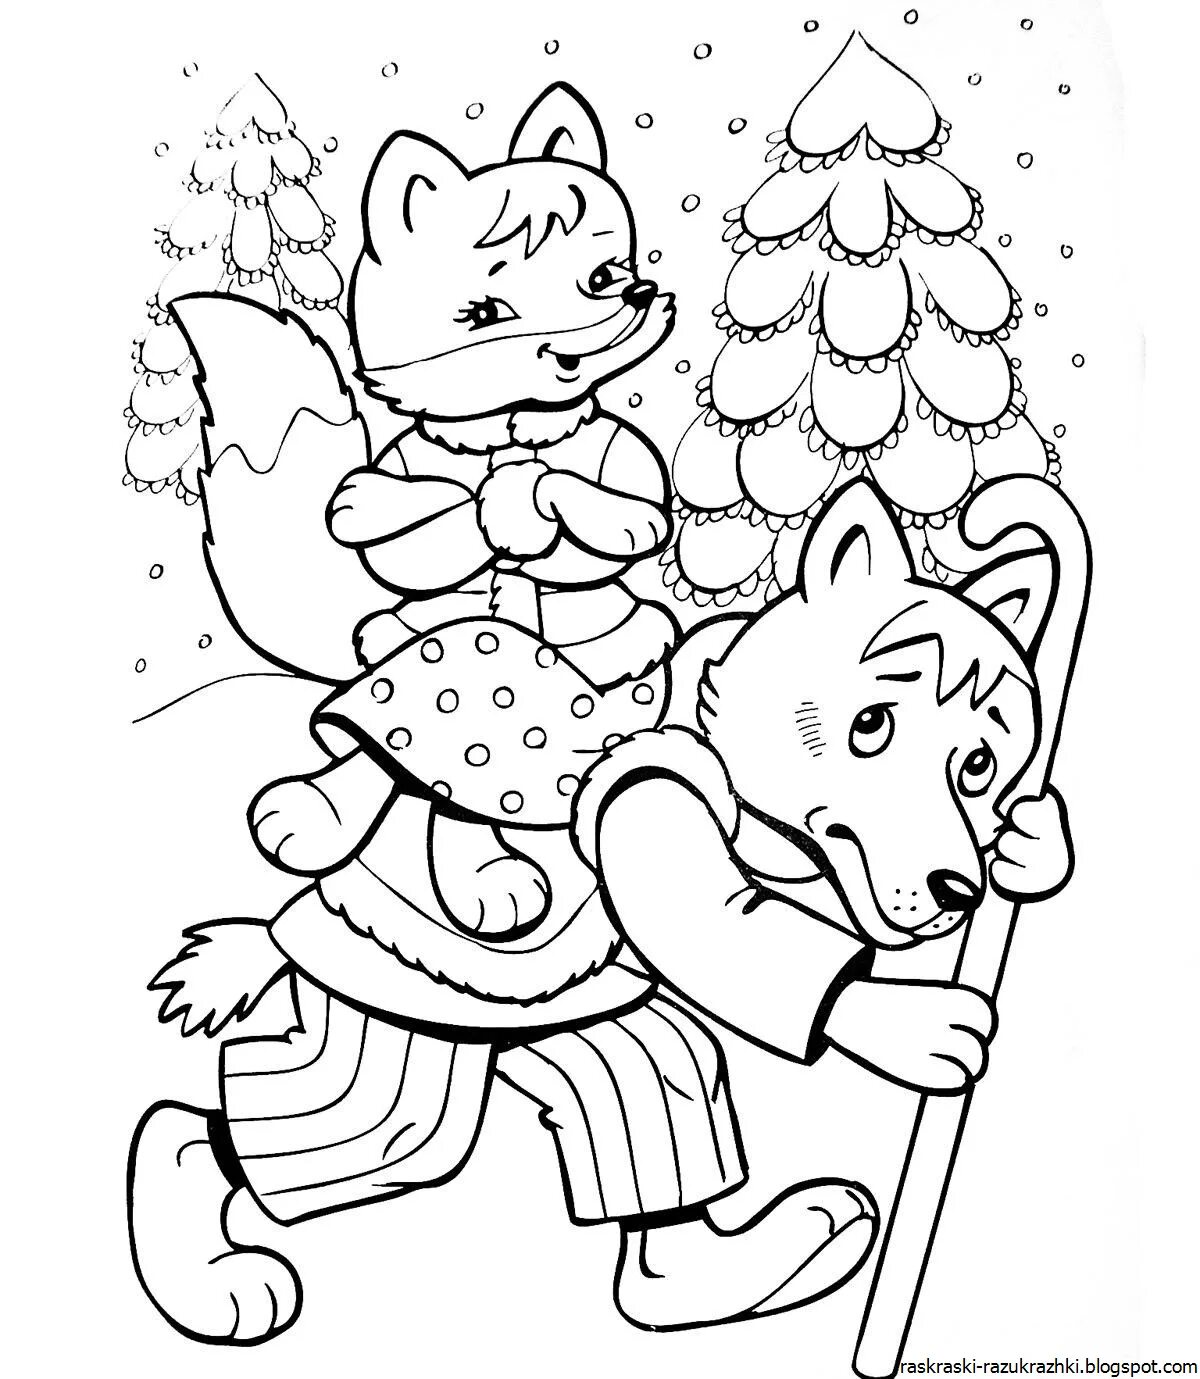 A fascinating coloring book based on Russian fairy tales for children